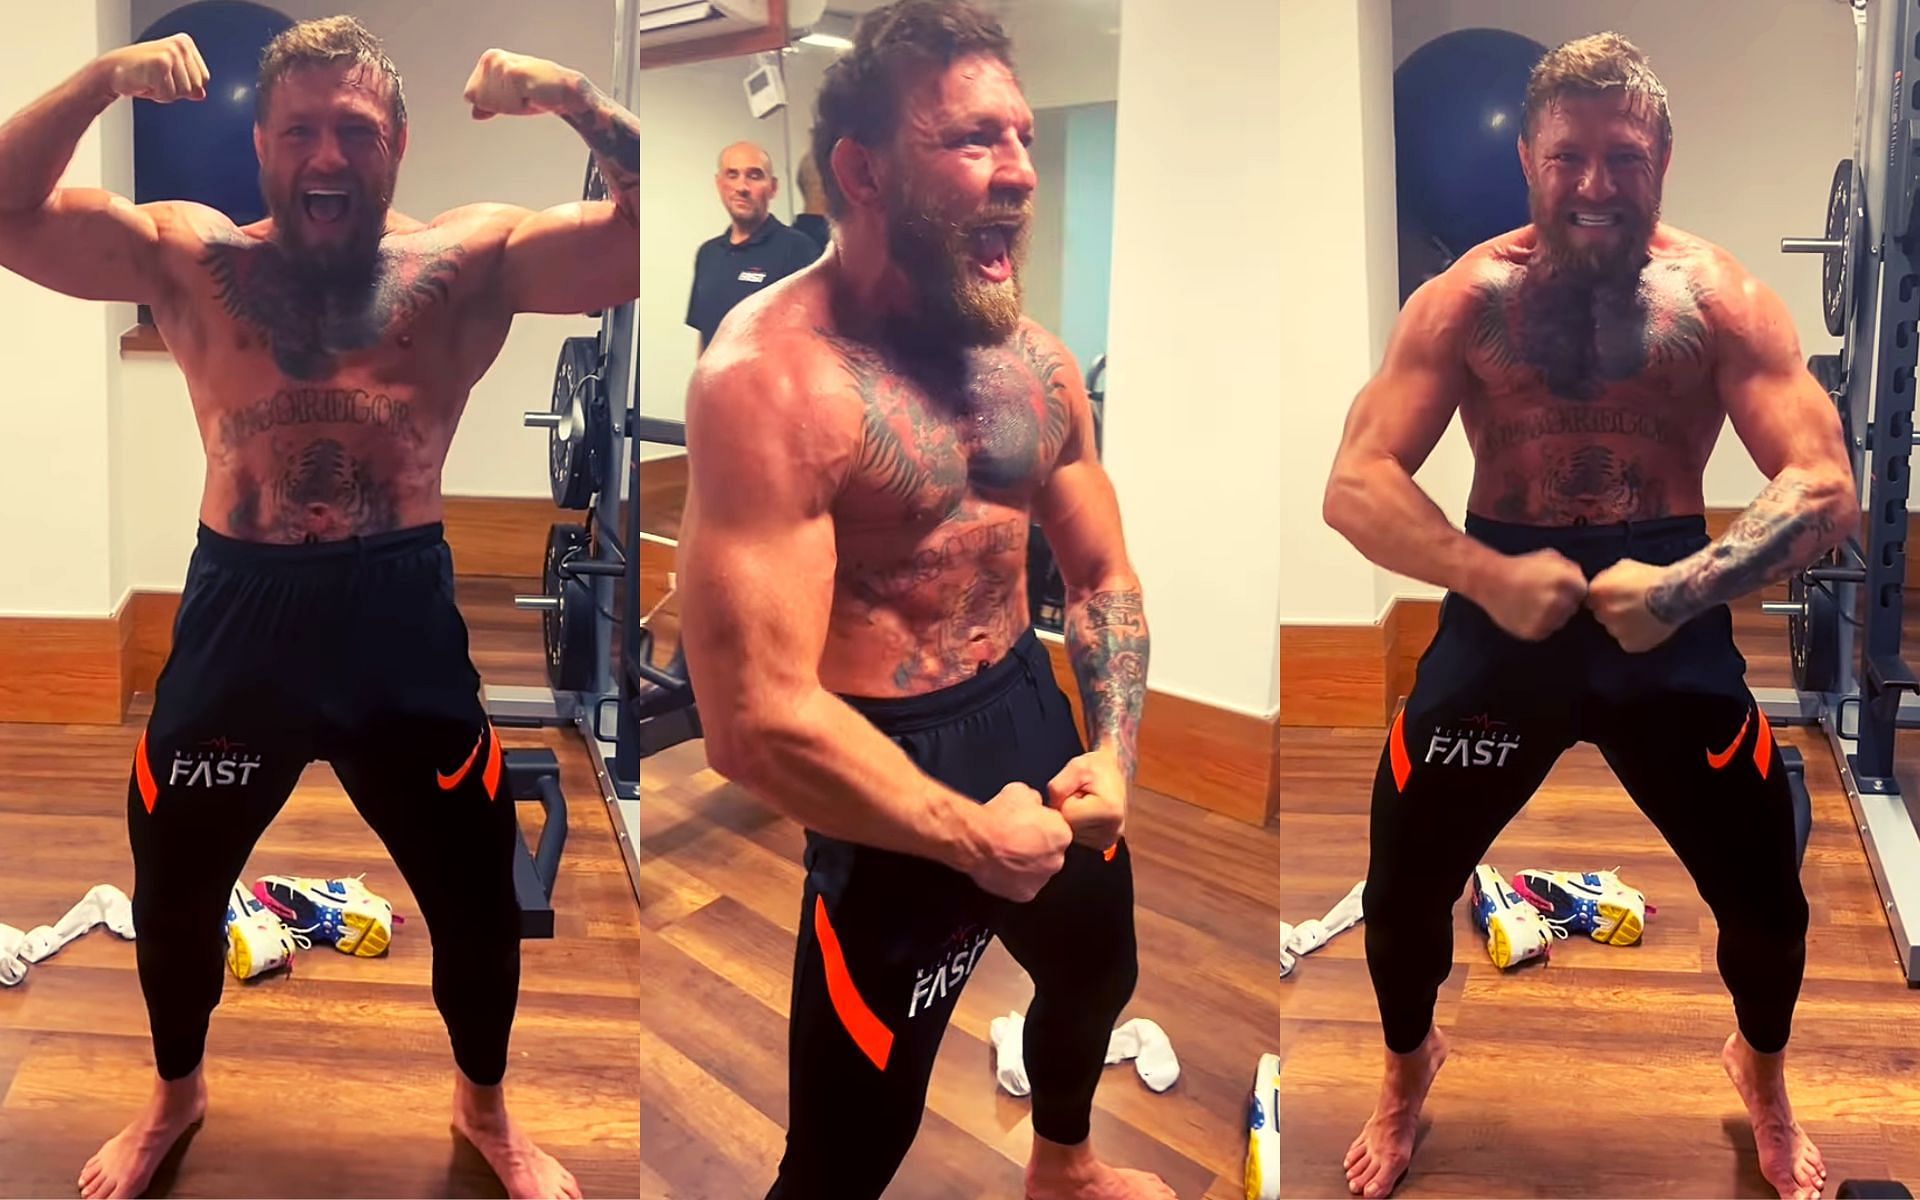 Fans accuse Conor McGregor of taking drugs as he posts bizarre screaming video [Images via @thenotoriousmma on Instagram]